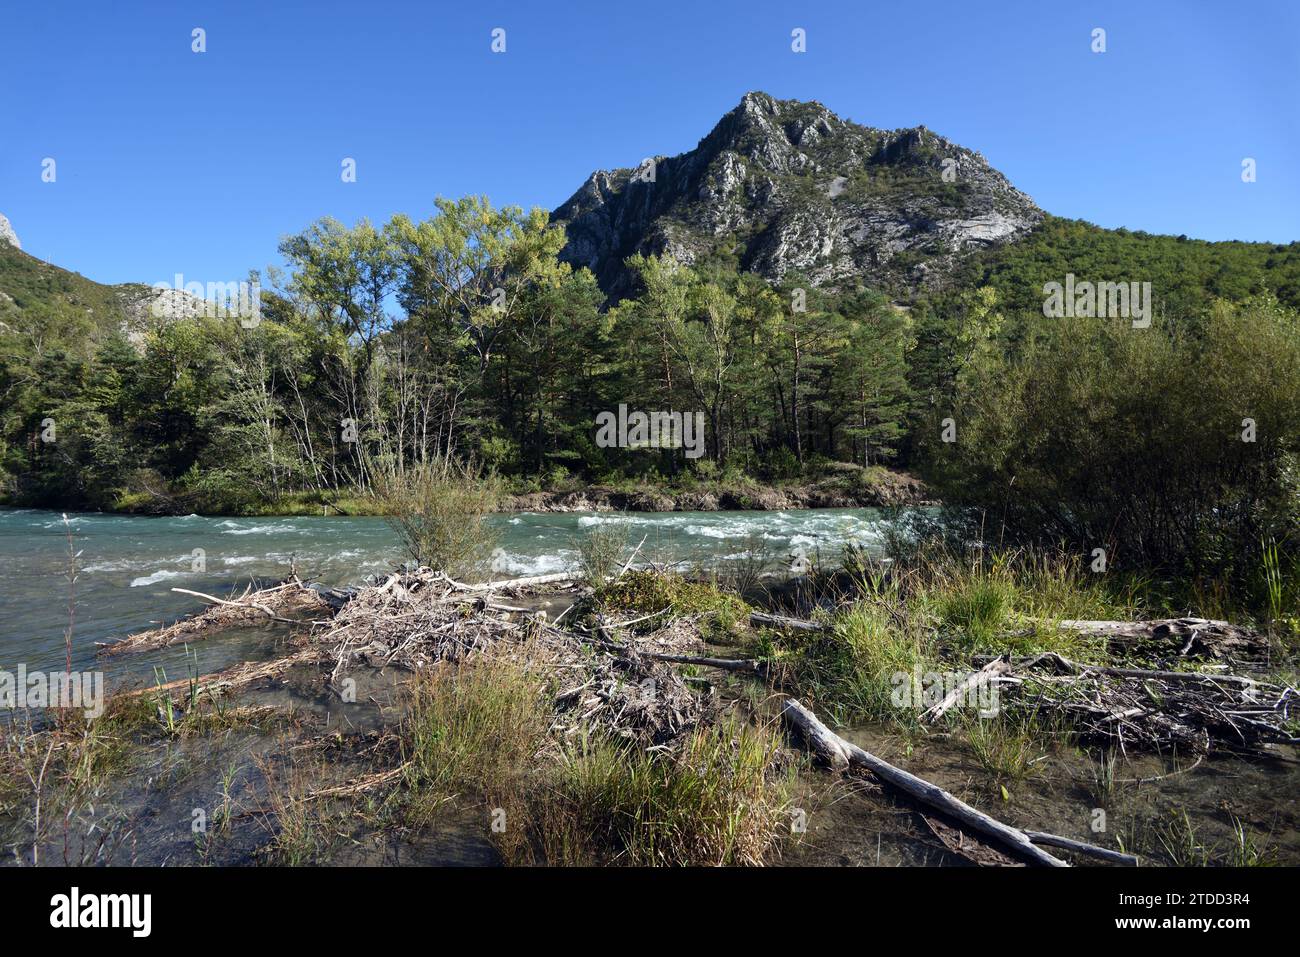 Fast Flowing River Verdon with Driftwood Logs near Chateuil in the Verdon Gorge Castellane Alpes-de-Haute-Provence France Stock Photo